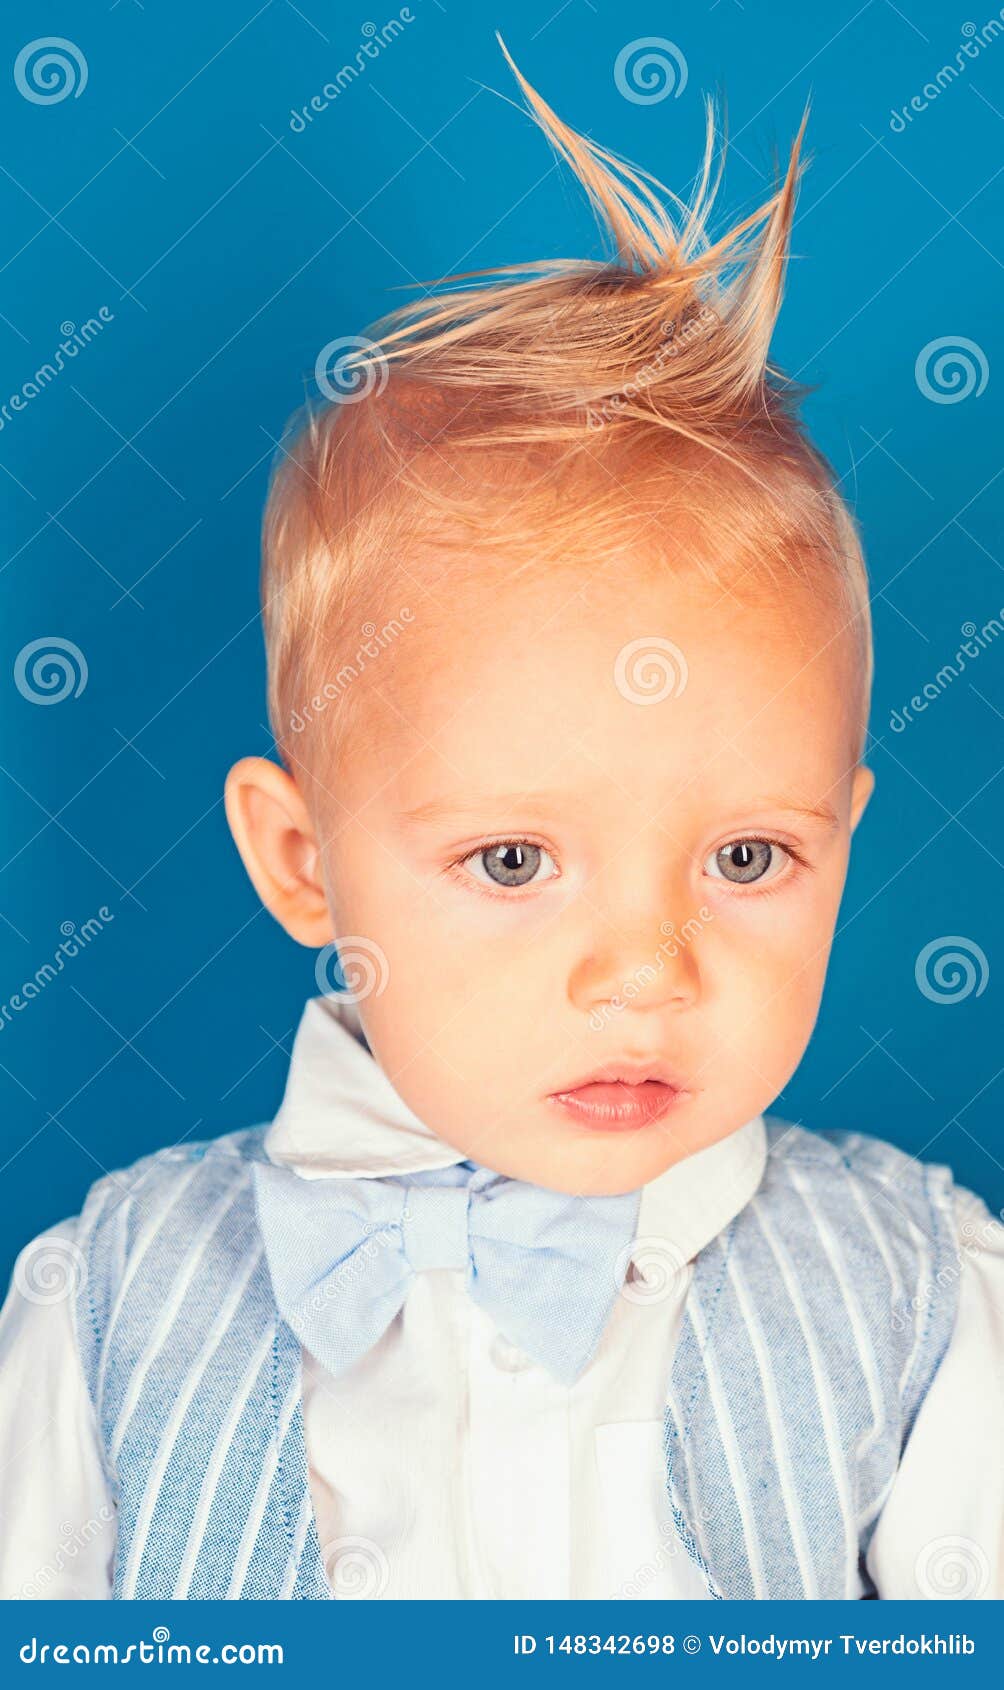 Healthier Hair from Root To Tip. Small Child with Messy Top Haircut. Boy  Child with Stylish Blond Hair Stock Photo - Image of boyhood, baby:  148342698